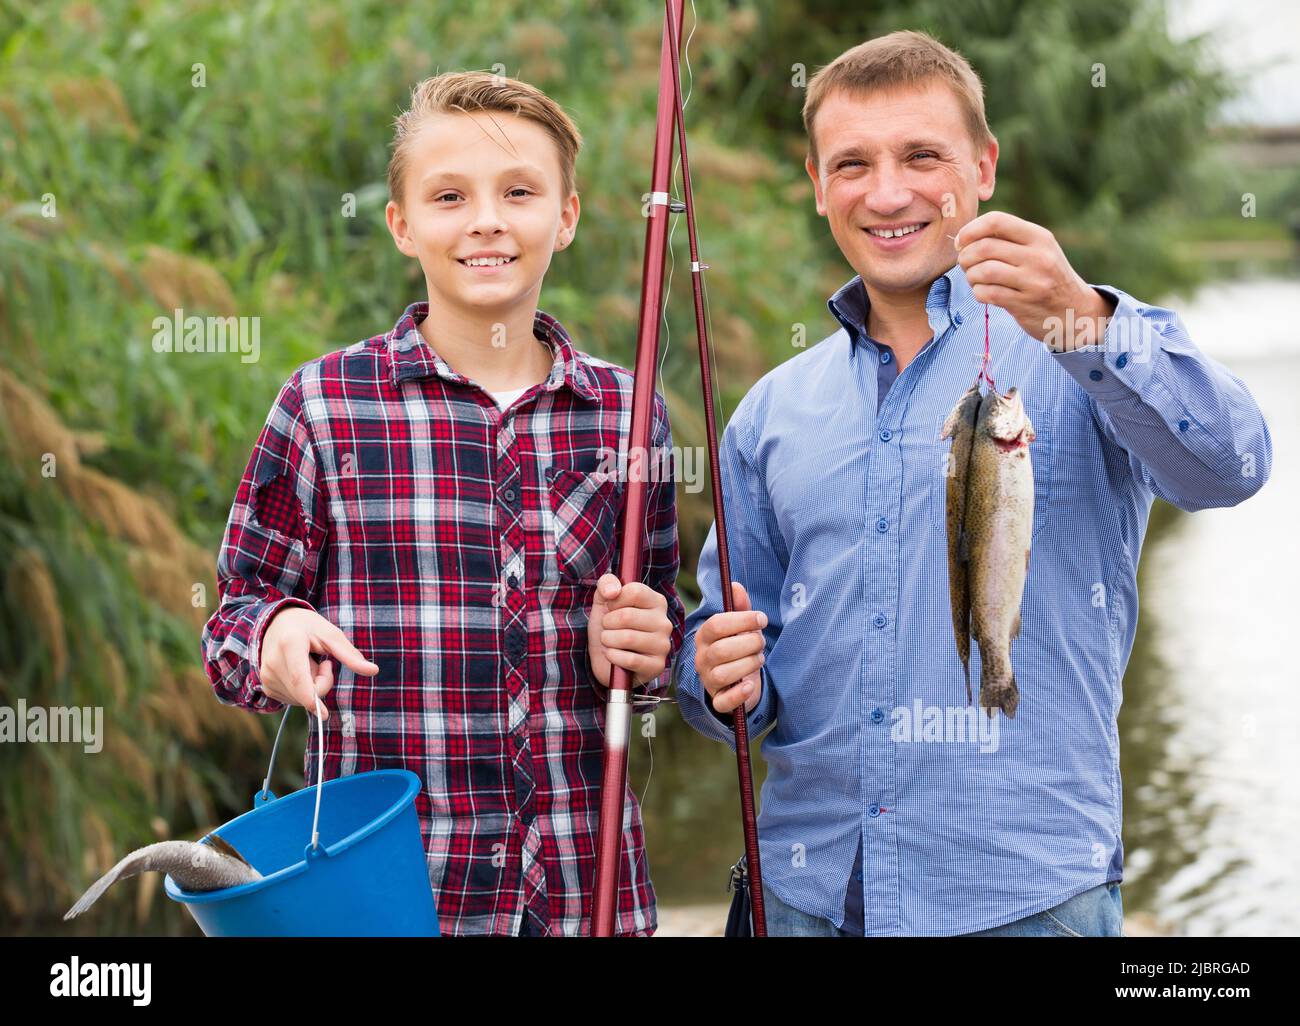 Friendly father with son looking at fish on hook Stock Photo